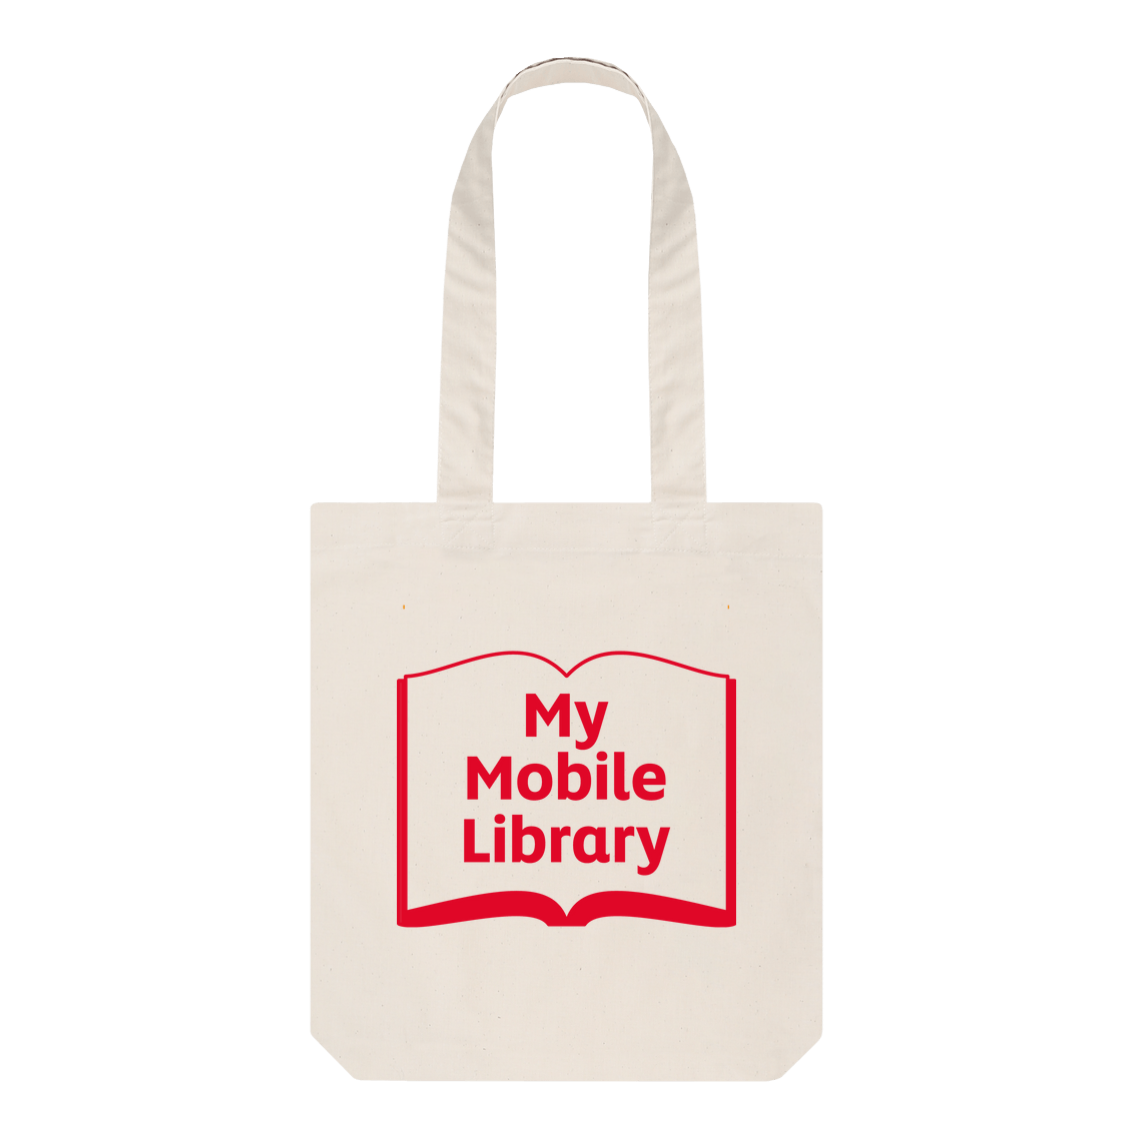 'My Mobile Library' tote bag